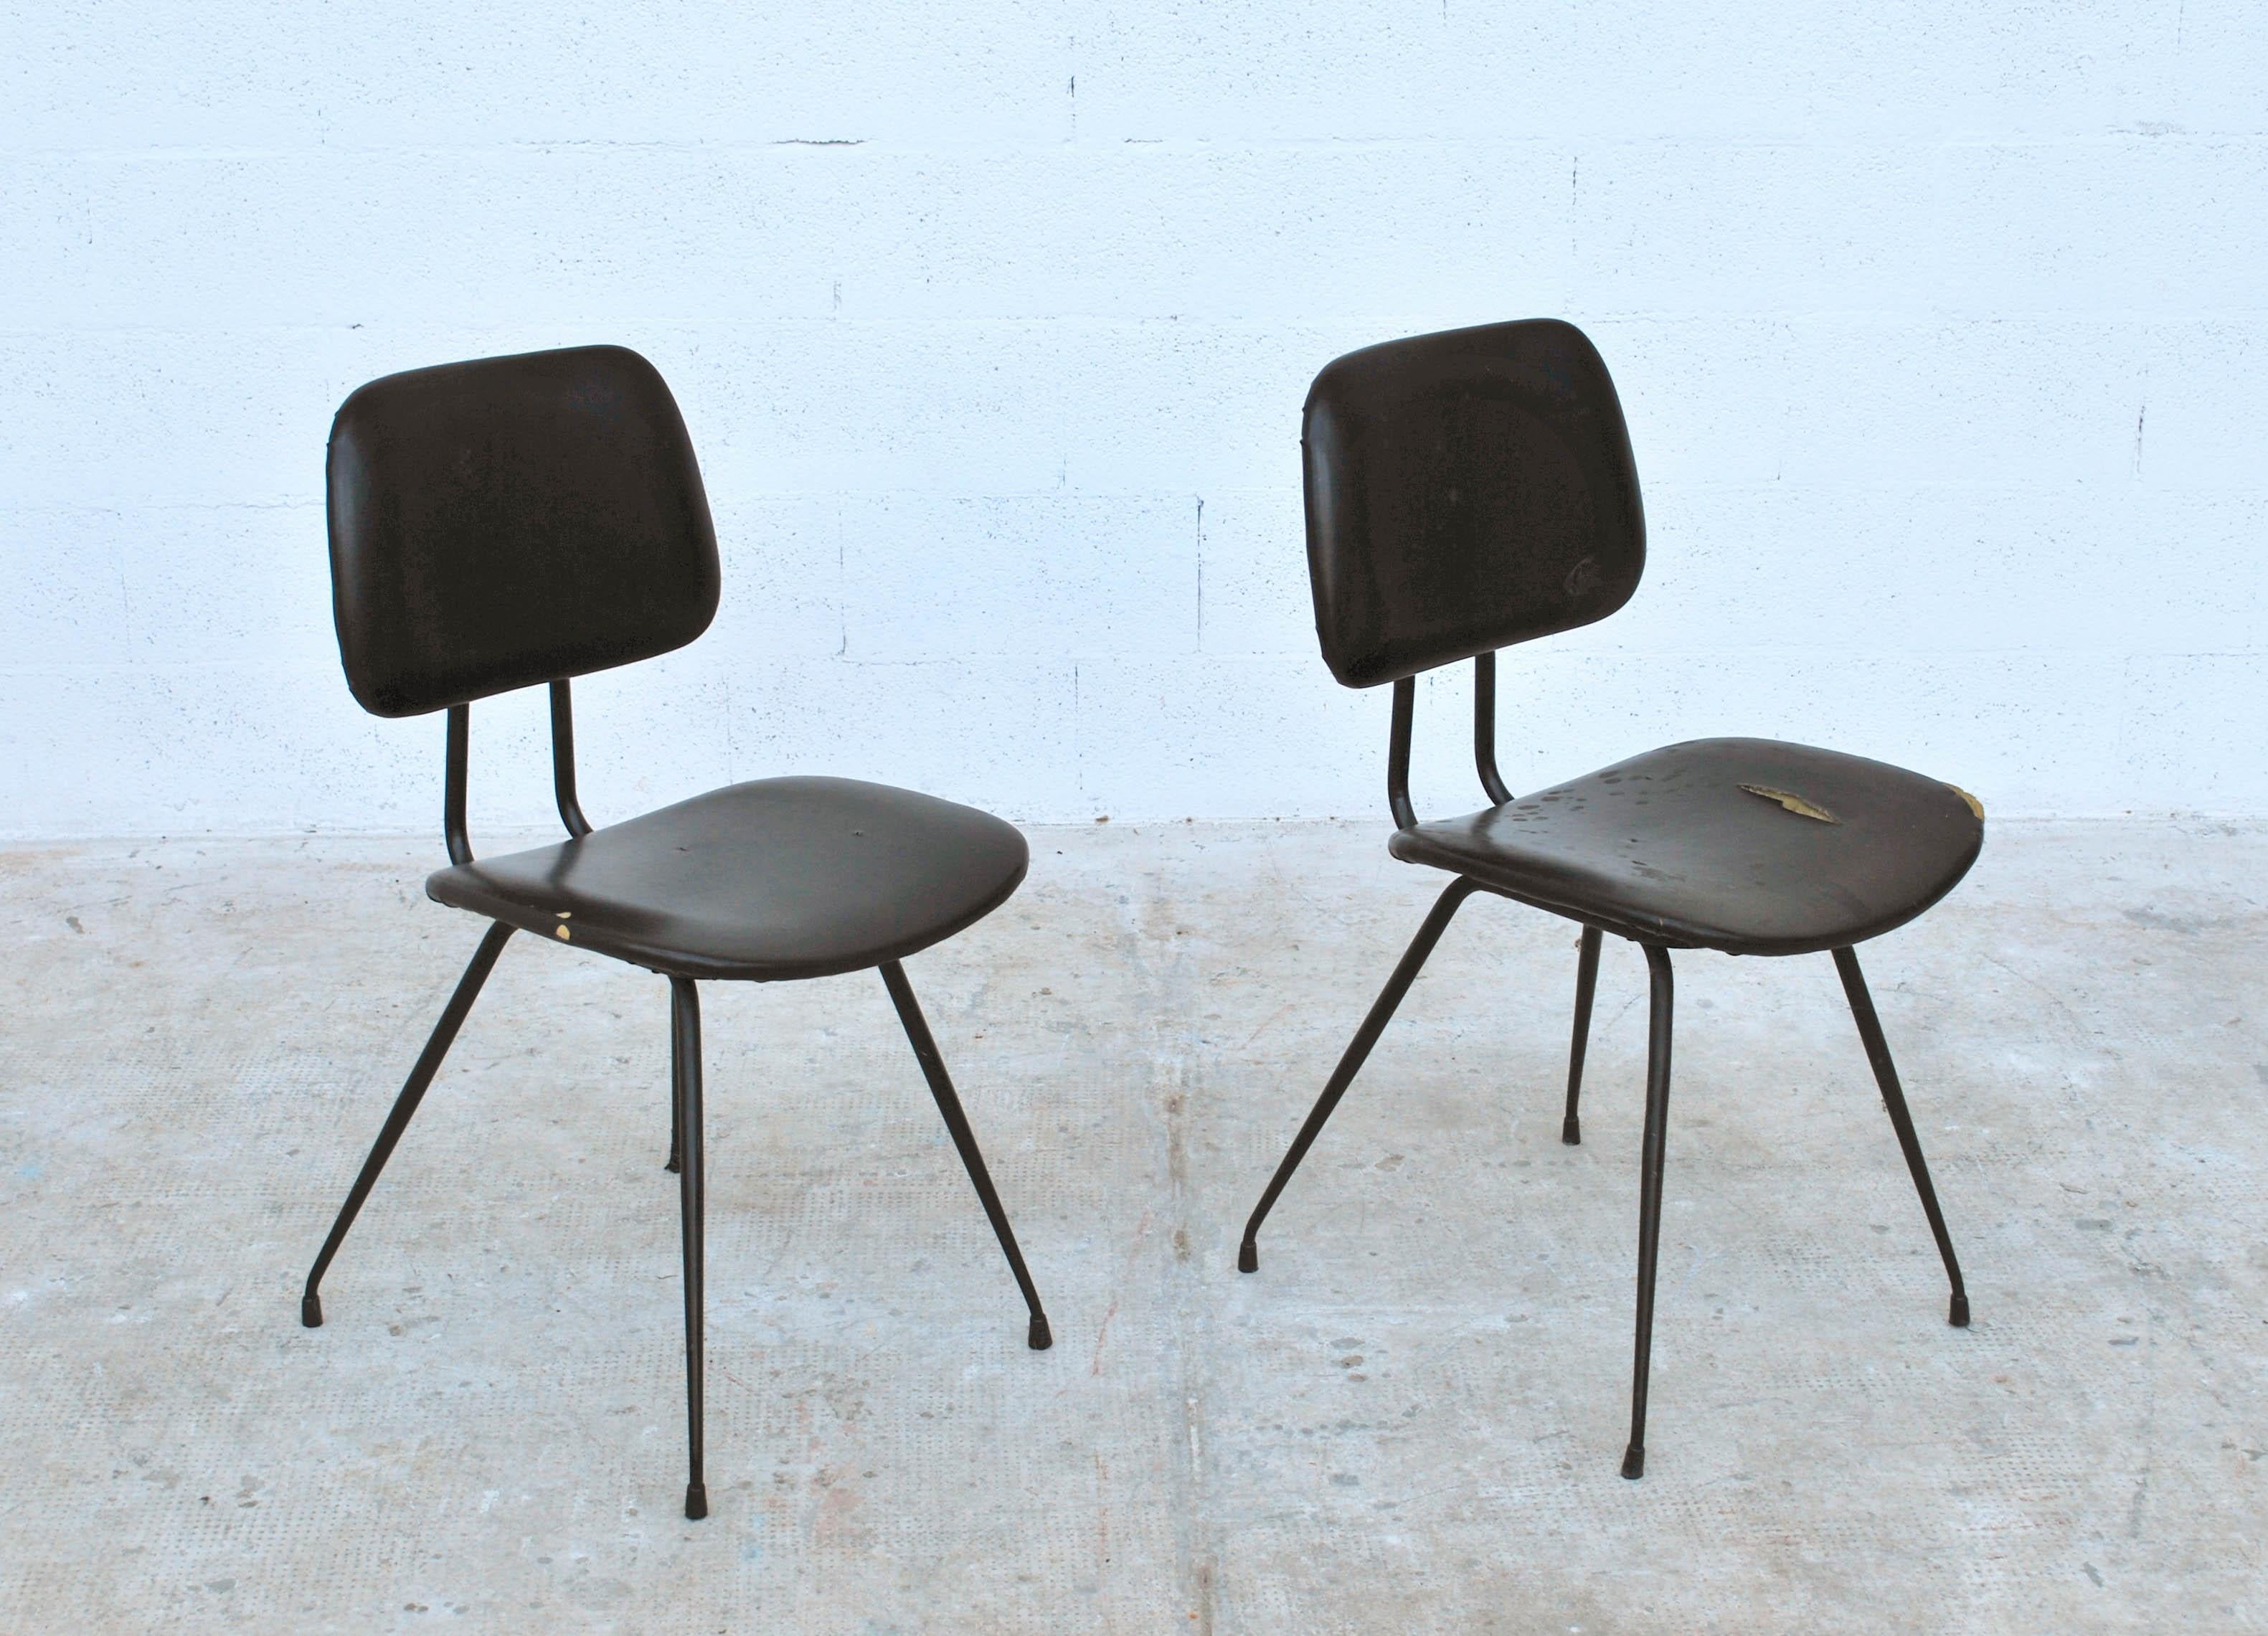 Side chairs DU12 designed by Mario Rinaldi for Rima producer - Italy - 1950s 
This article is a well-known design, well documented in the general design literature.
The history of design, above all Italian, has combined, since the early decades of